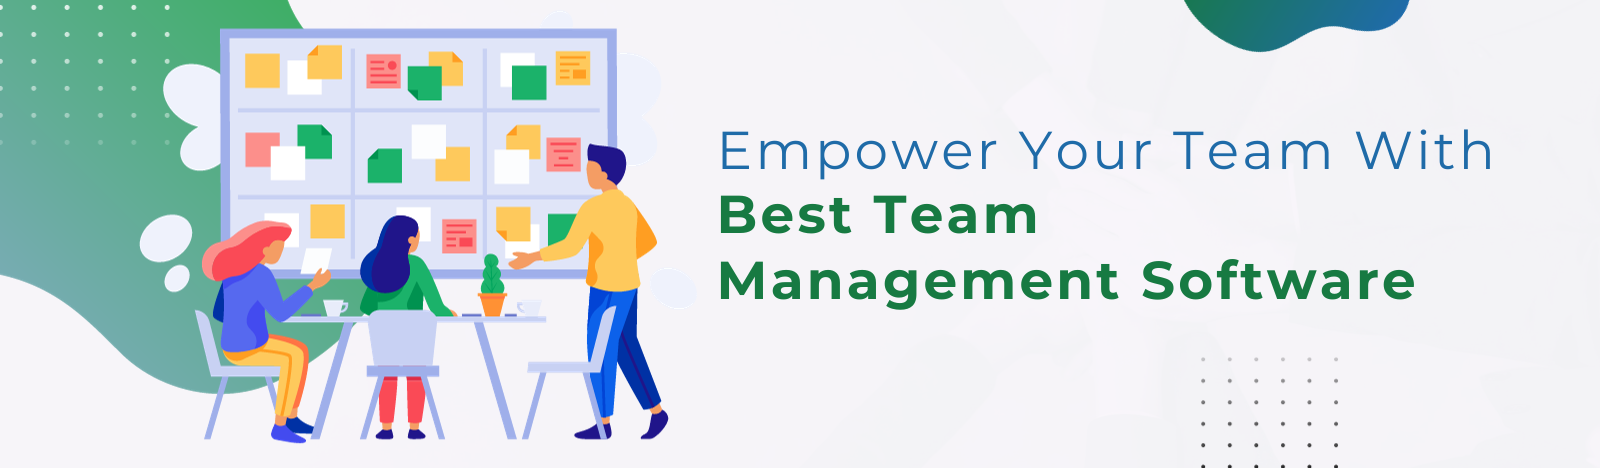 Empower Your Team with the Best Team Management Software